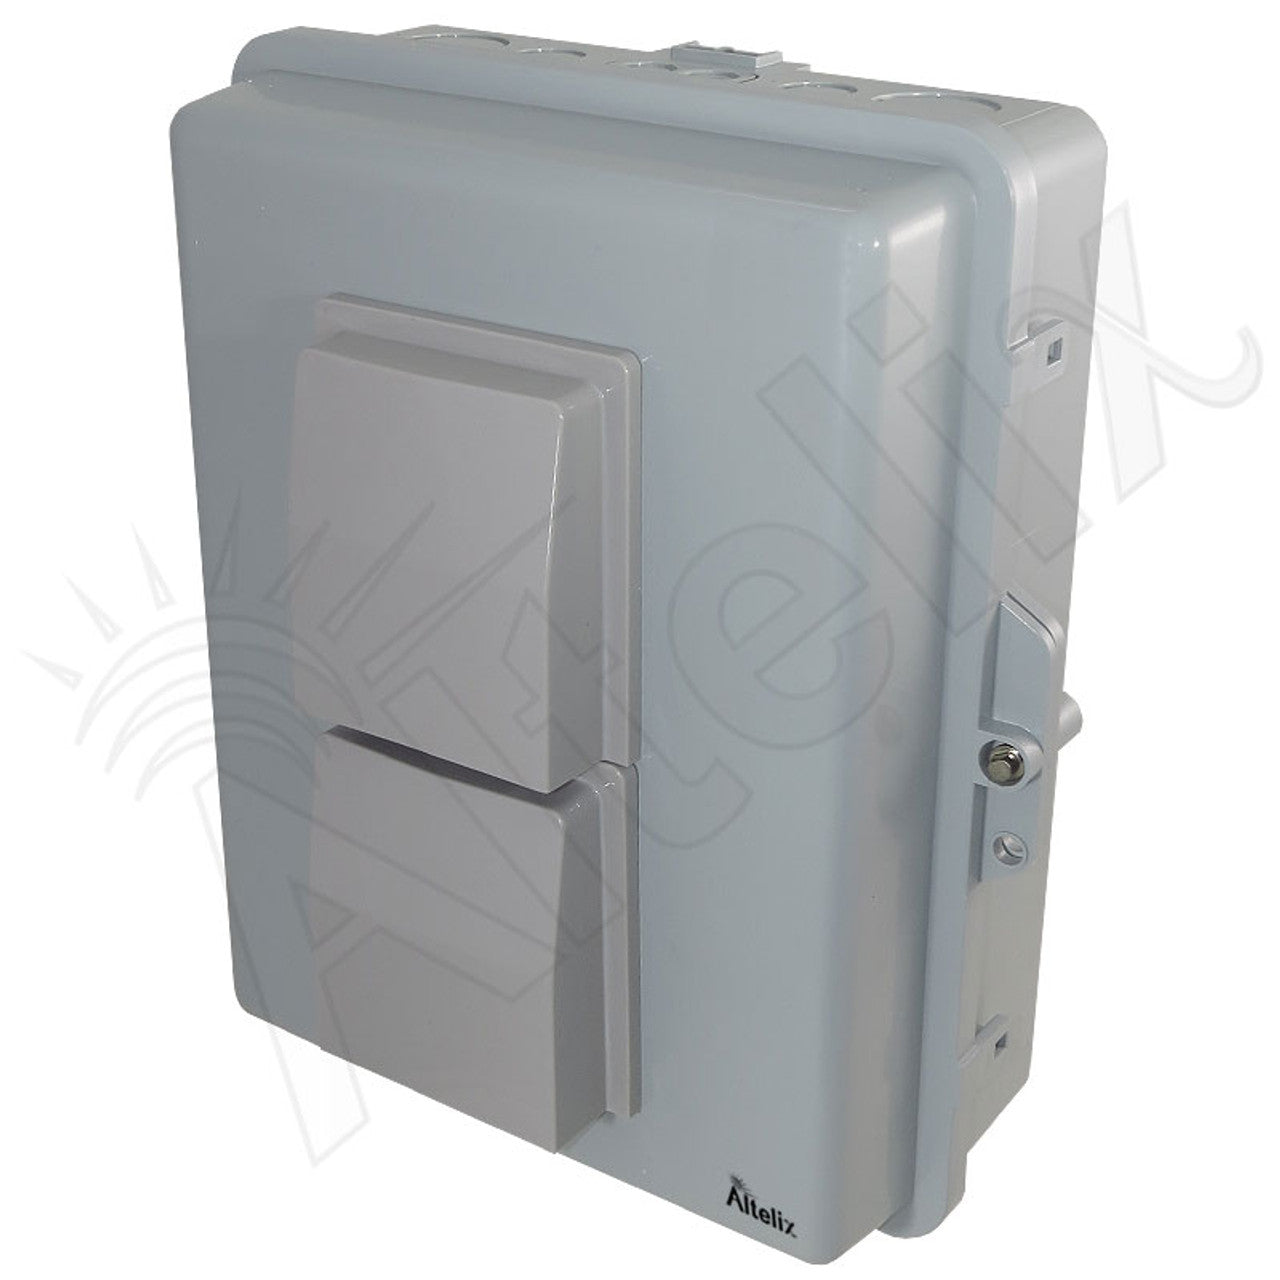 Altelix 14x11x5 Polycarbonate + ABS Vented Weatherproof NEMA Enclosure with Aluminum Mounting Plate, 120 VAC Outlets & Power Cord - 0